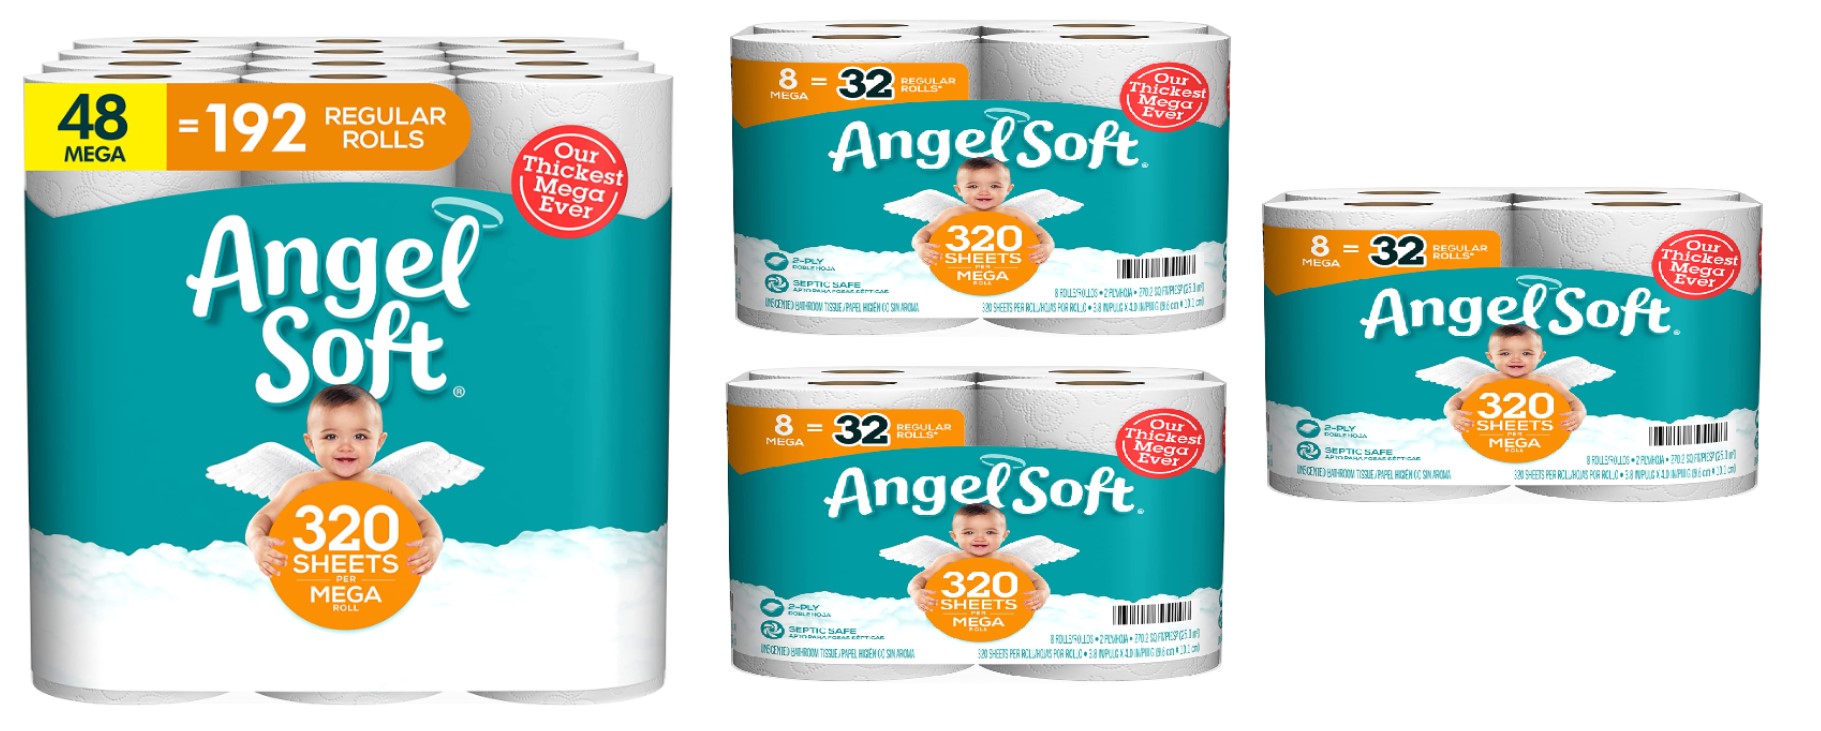 72-Count Angel Soft 2-Ply Mega Rolls Toilet Paper $51.66 + $15 Amazon Credit & More + Free shipping